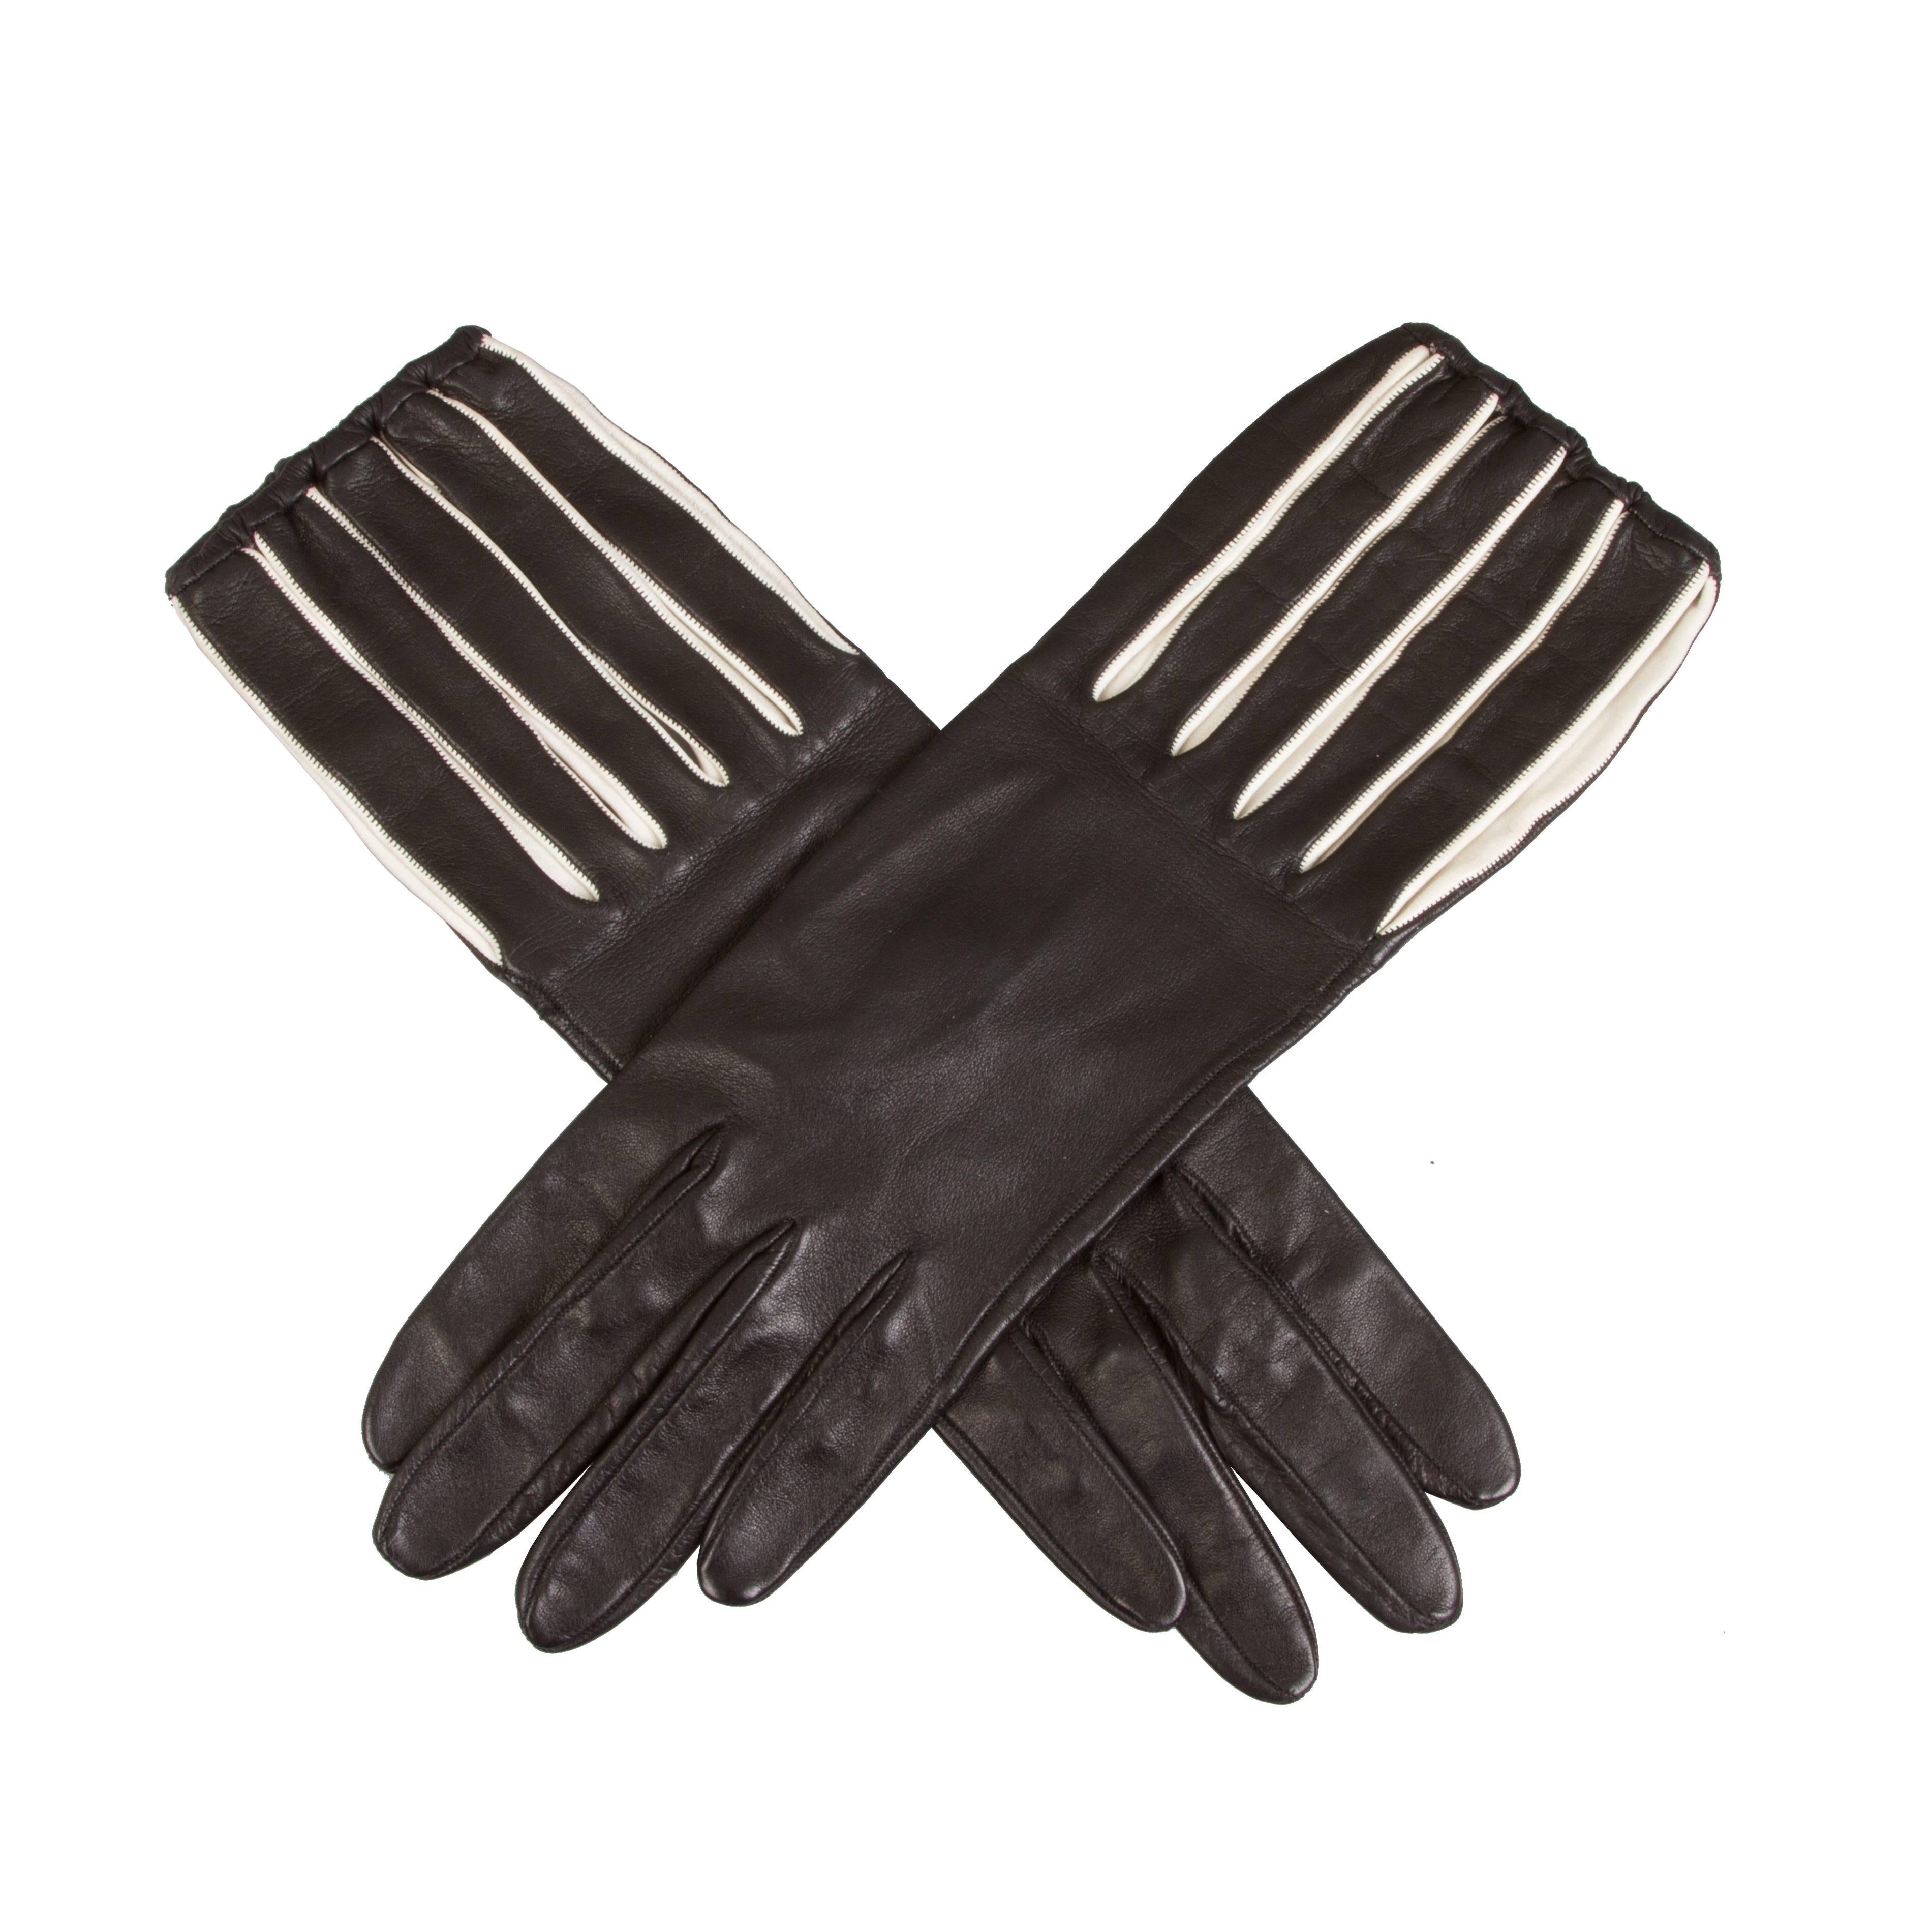 Optical Black and White Kid Gloves by Freddy